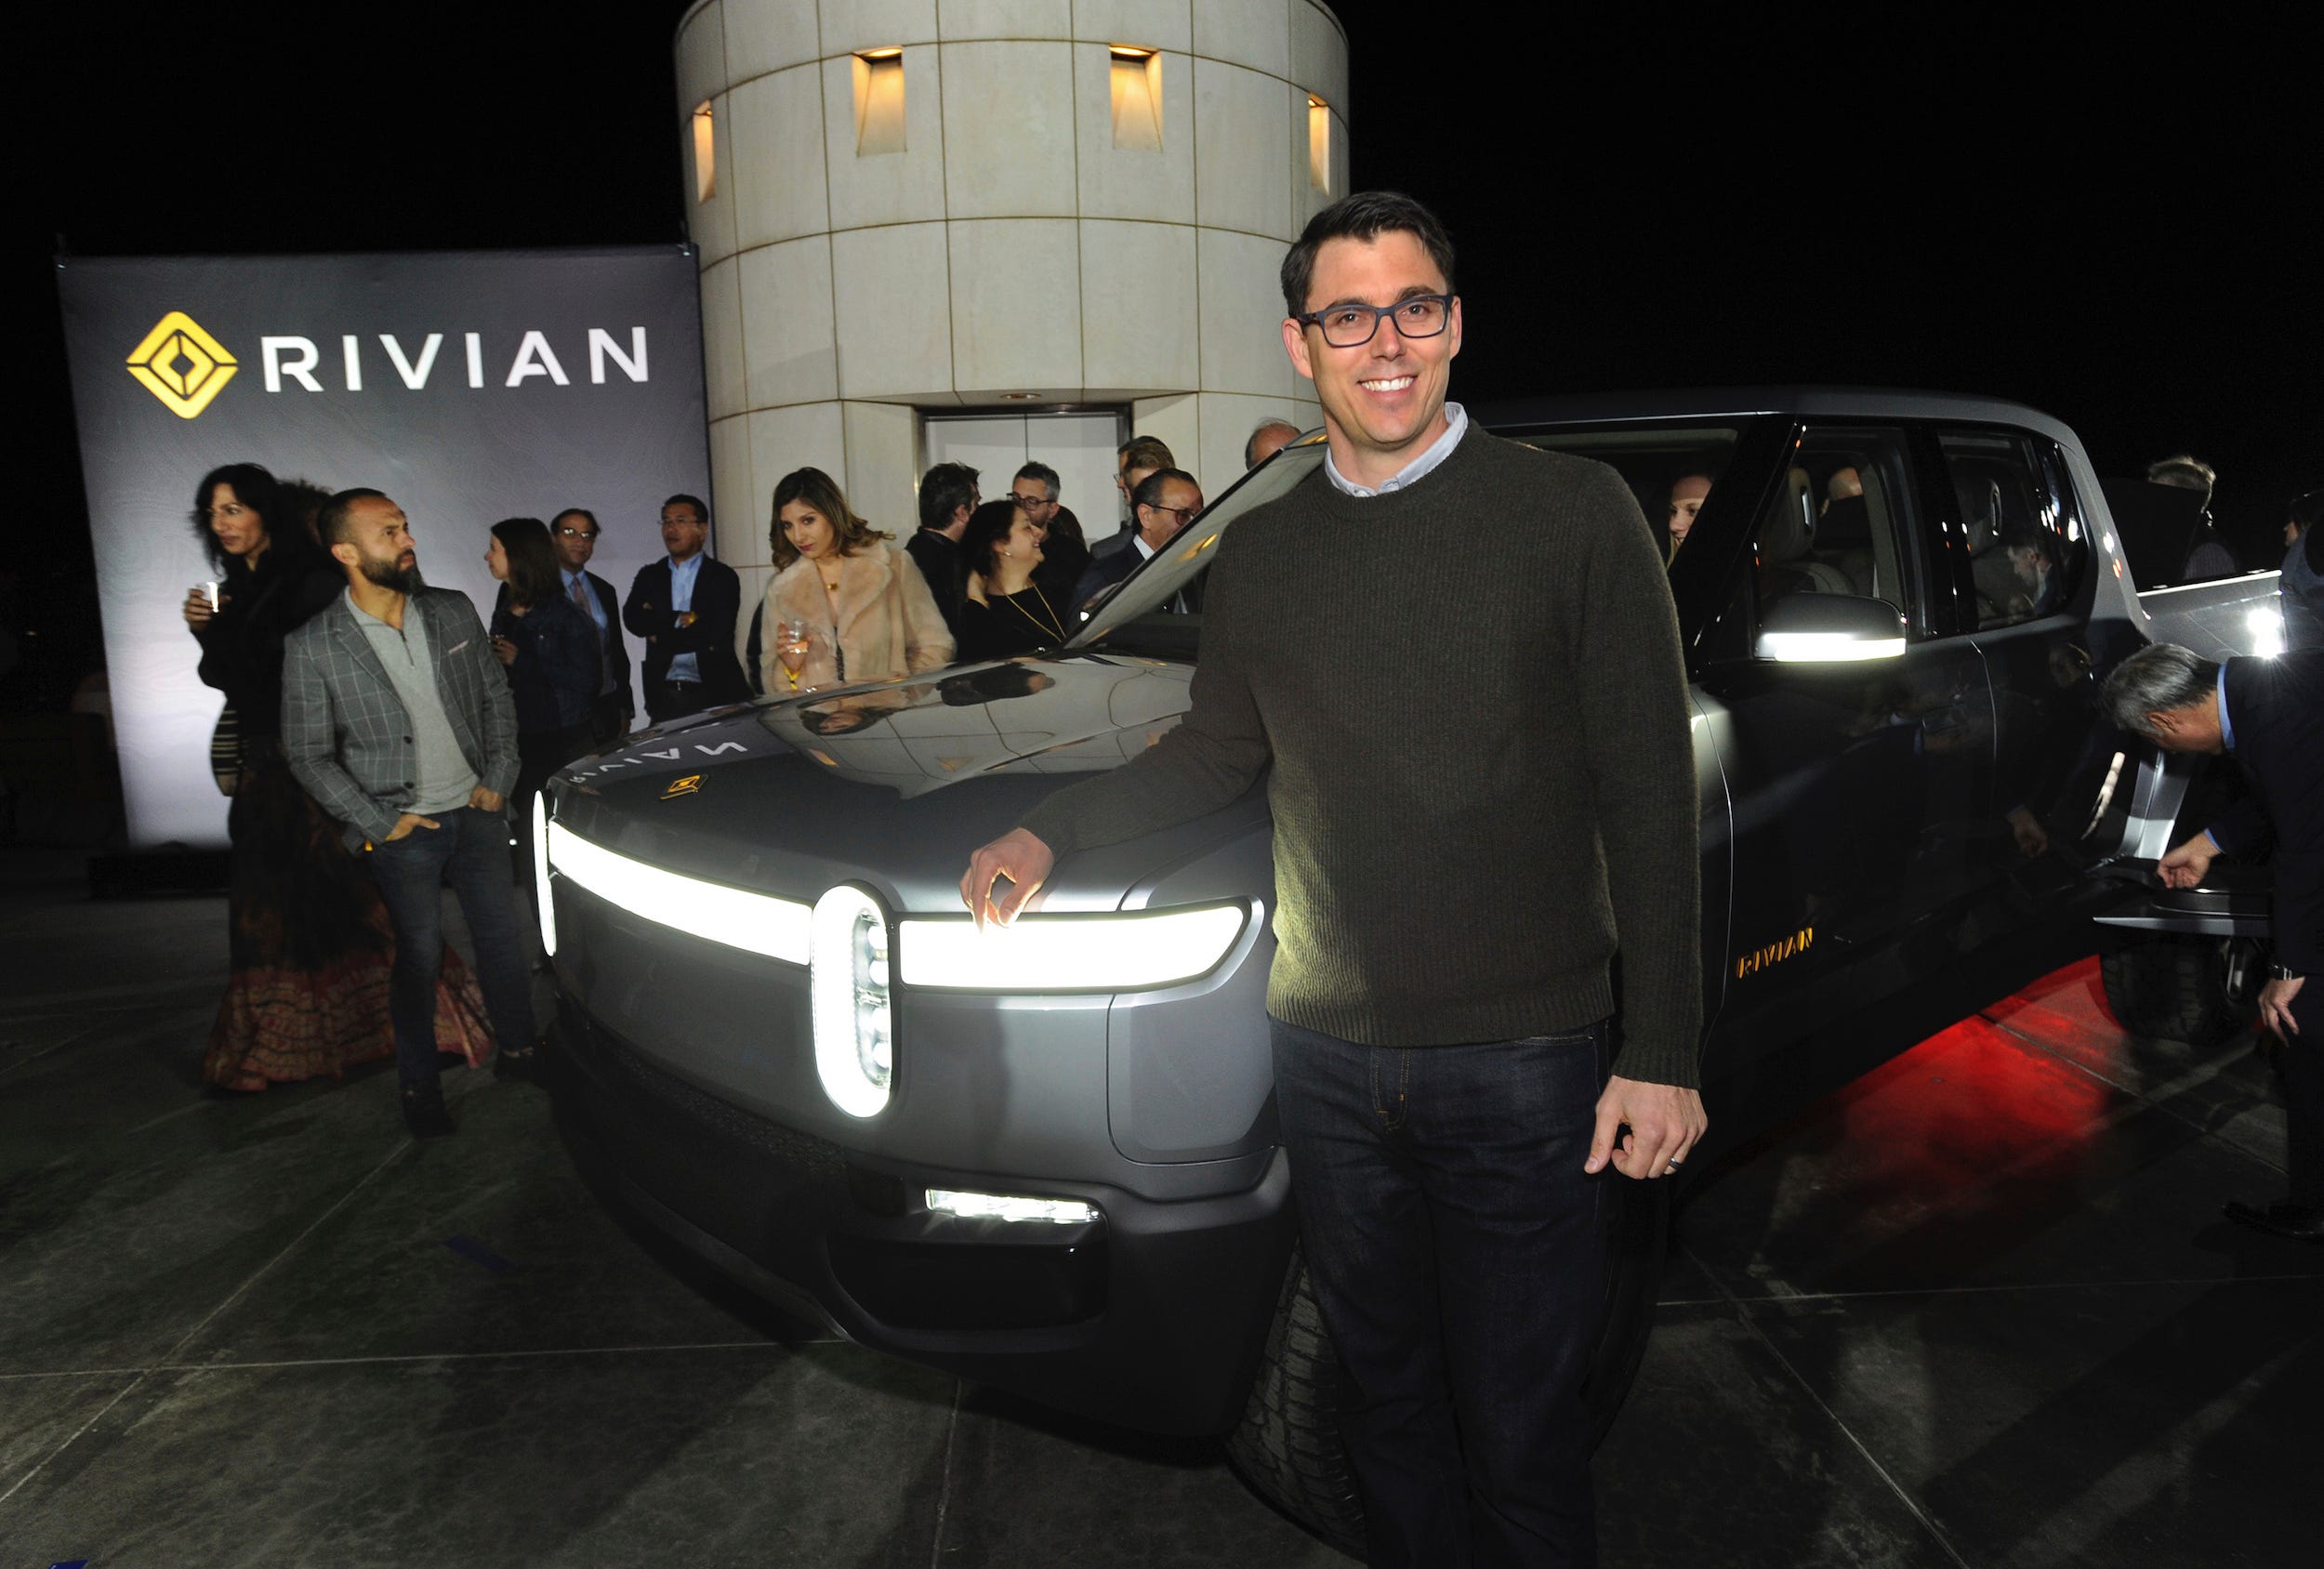 rivian workers won't be getting much sleep tonight